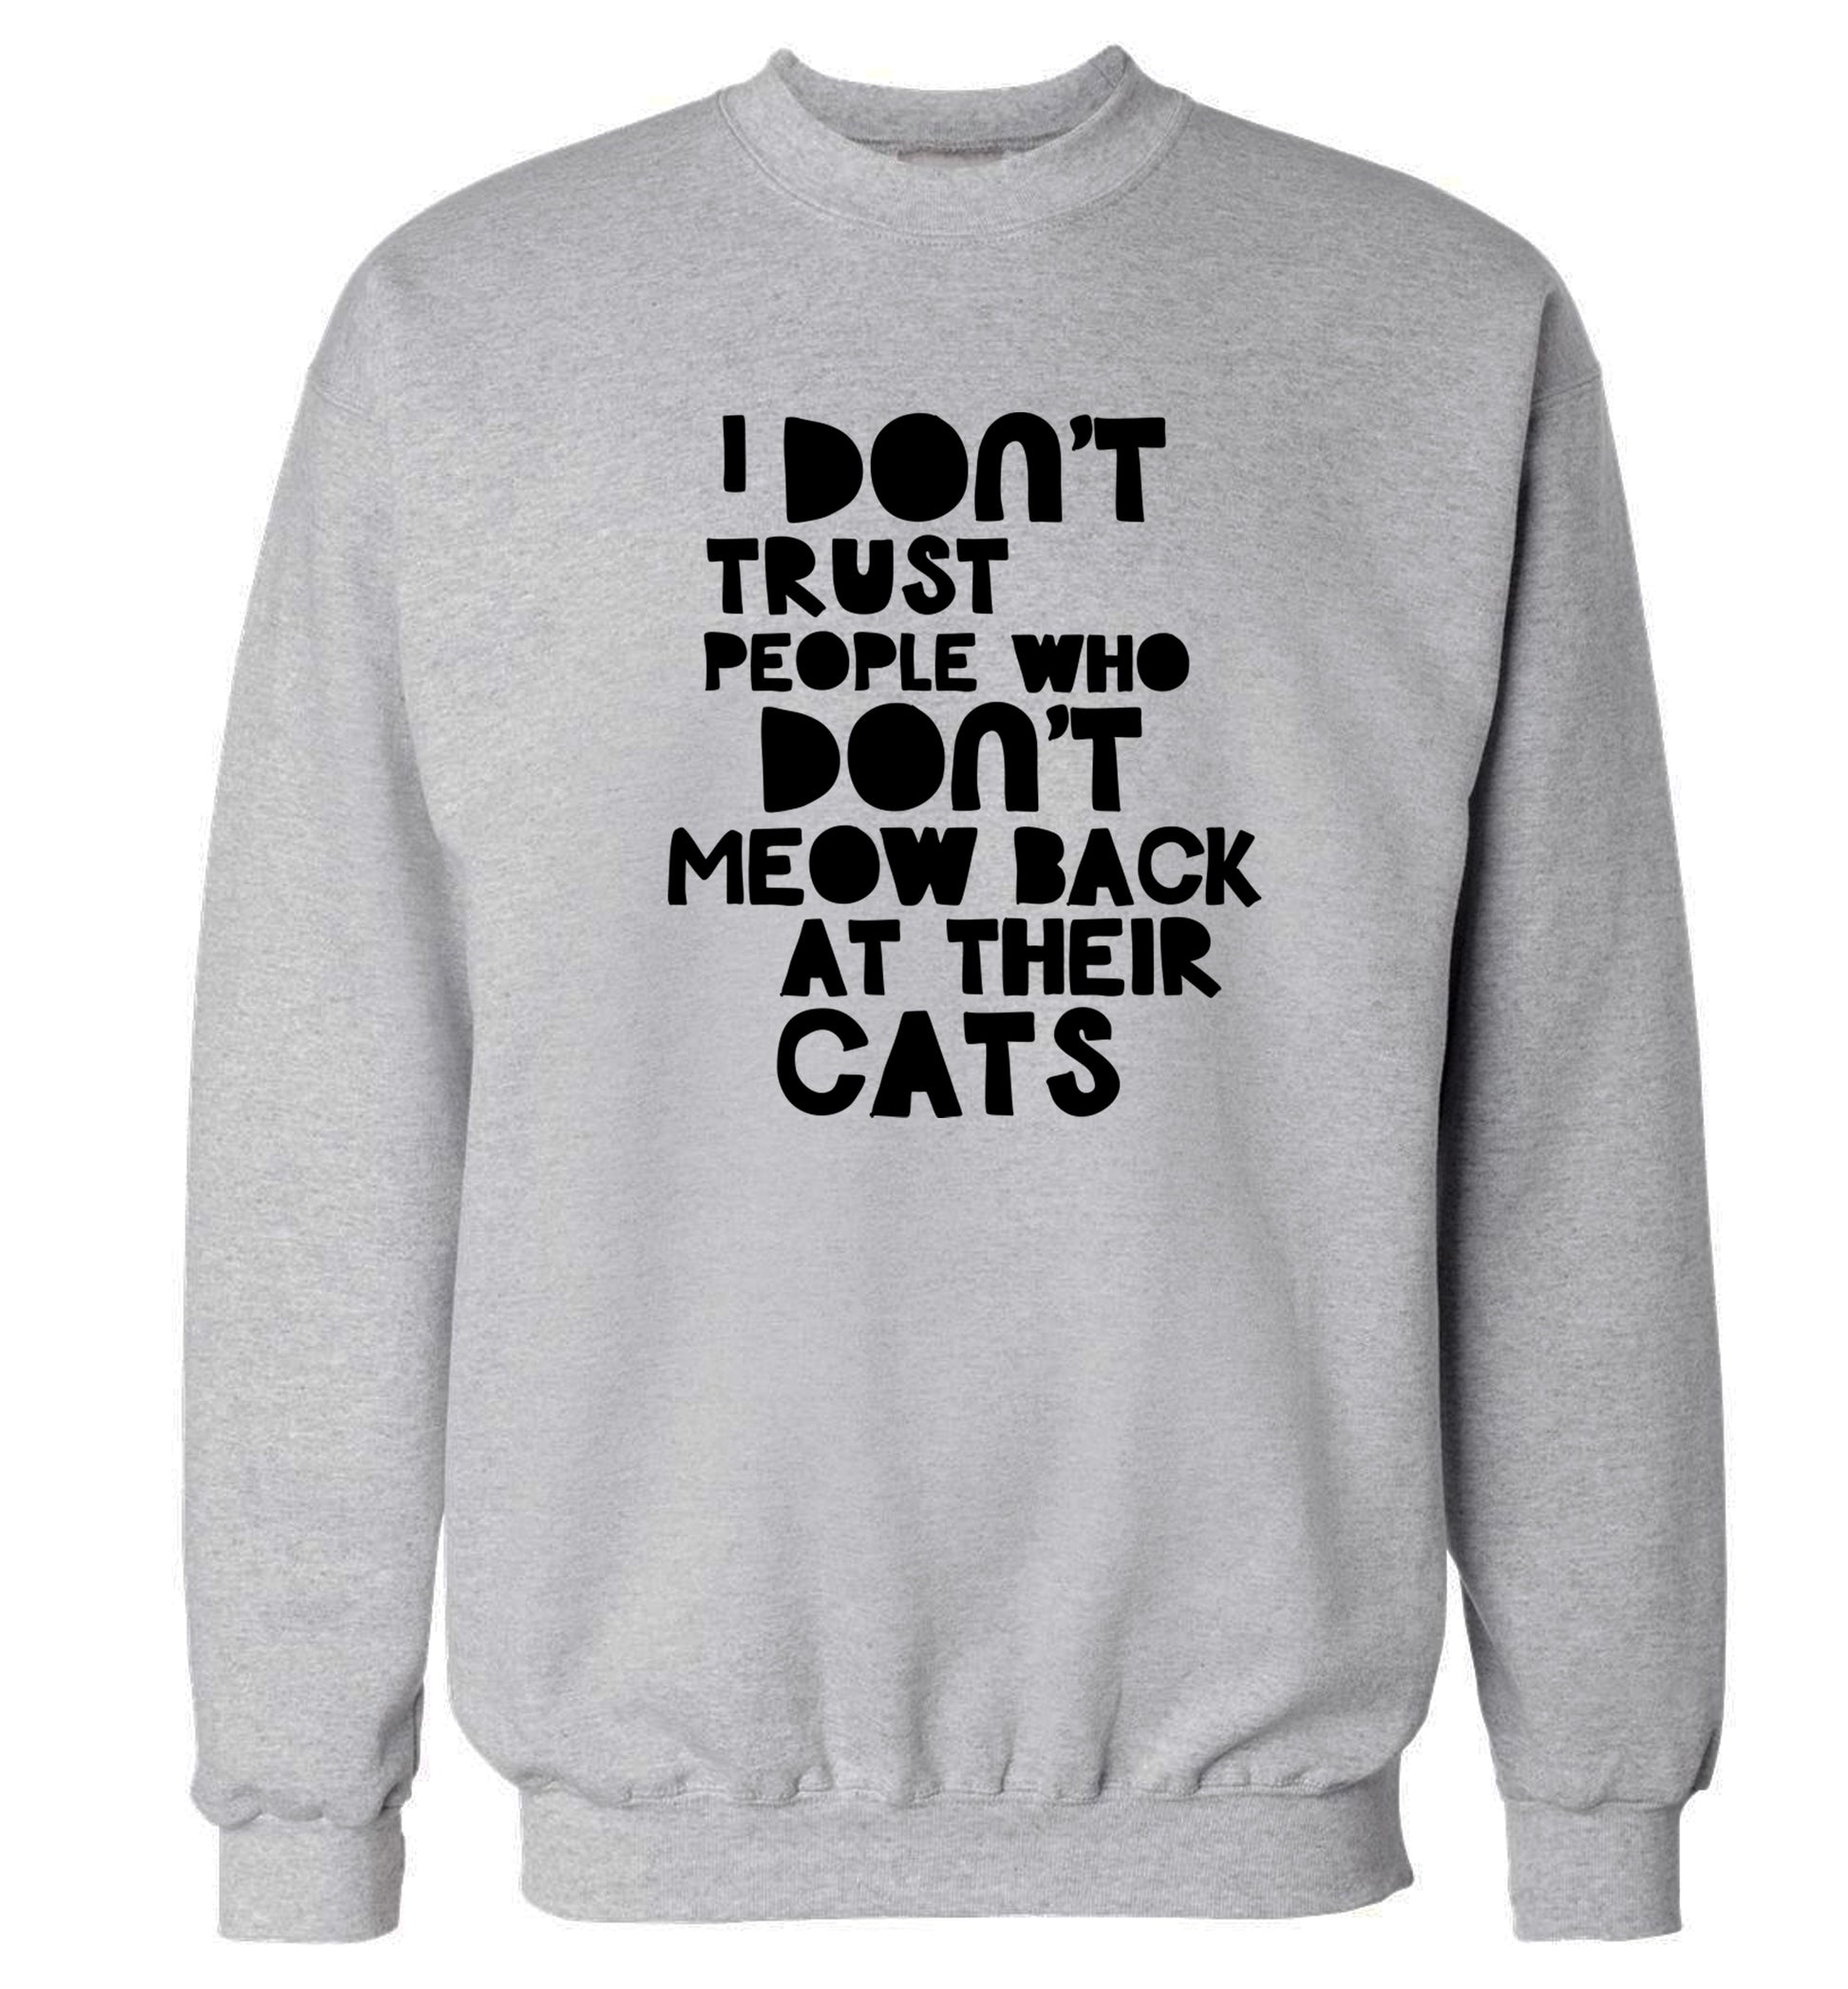 I don't trust people who don't meow back at their cats Adult's unisex grey Sweater 2XL